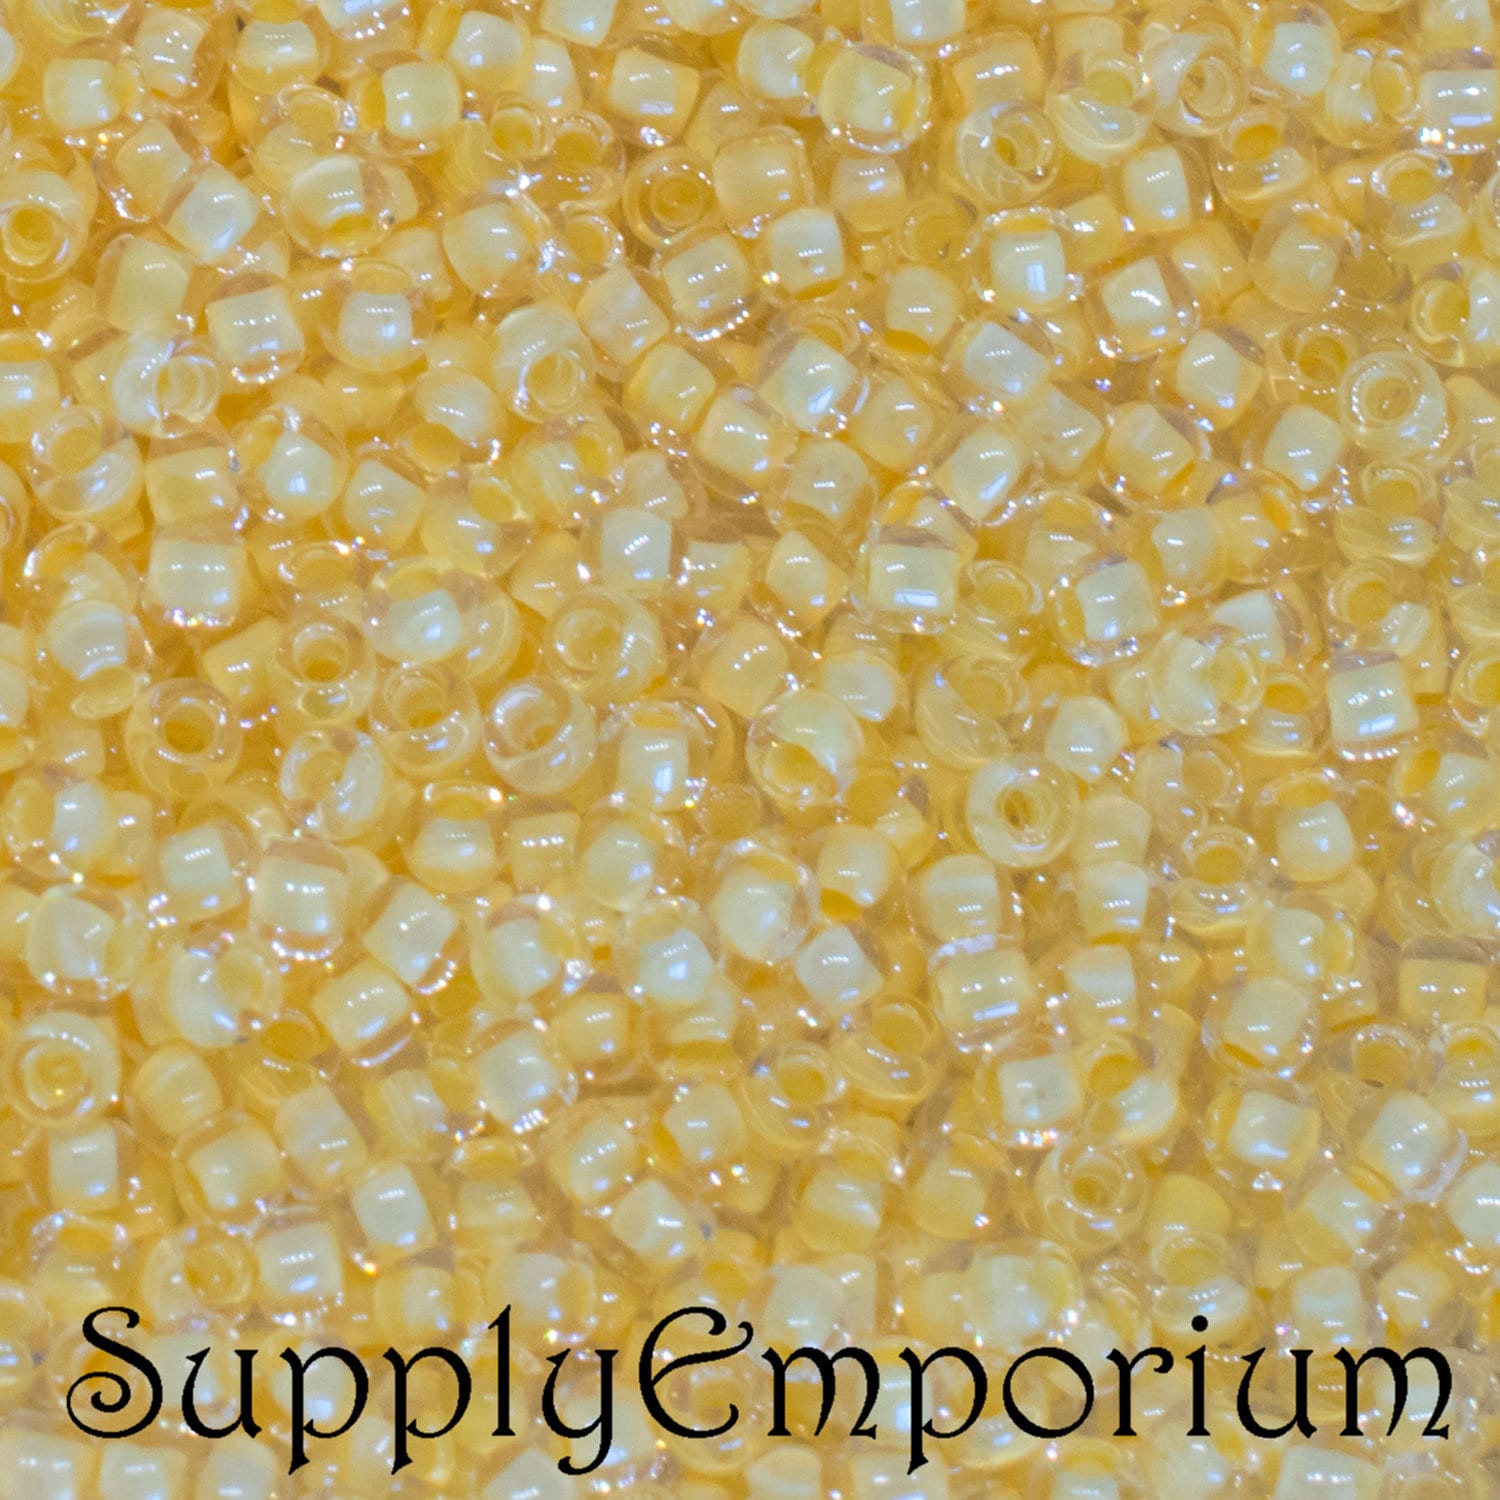 20g 8/0 Marigold / Copper Lined Toho Seed Beads - 20grams - spectacular  colors Toho 745